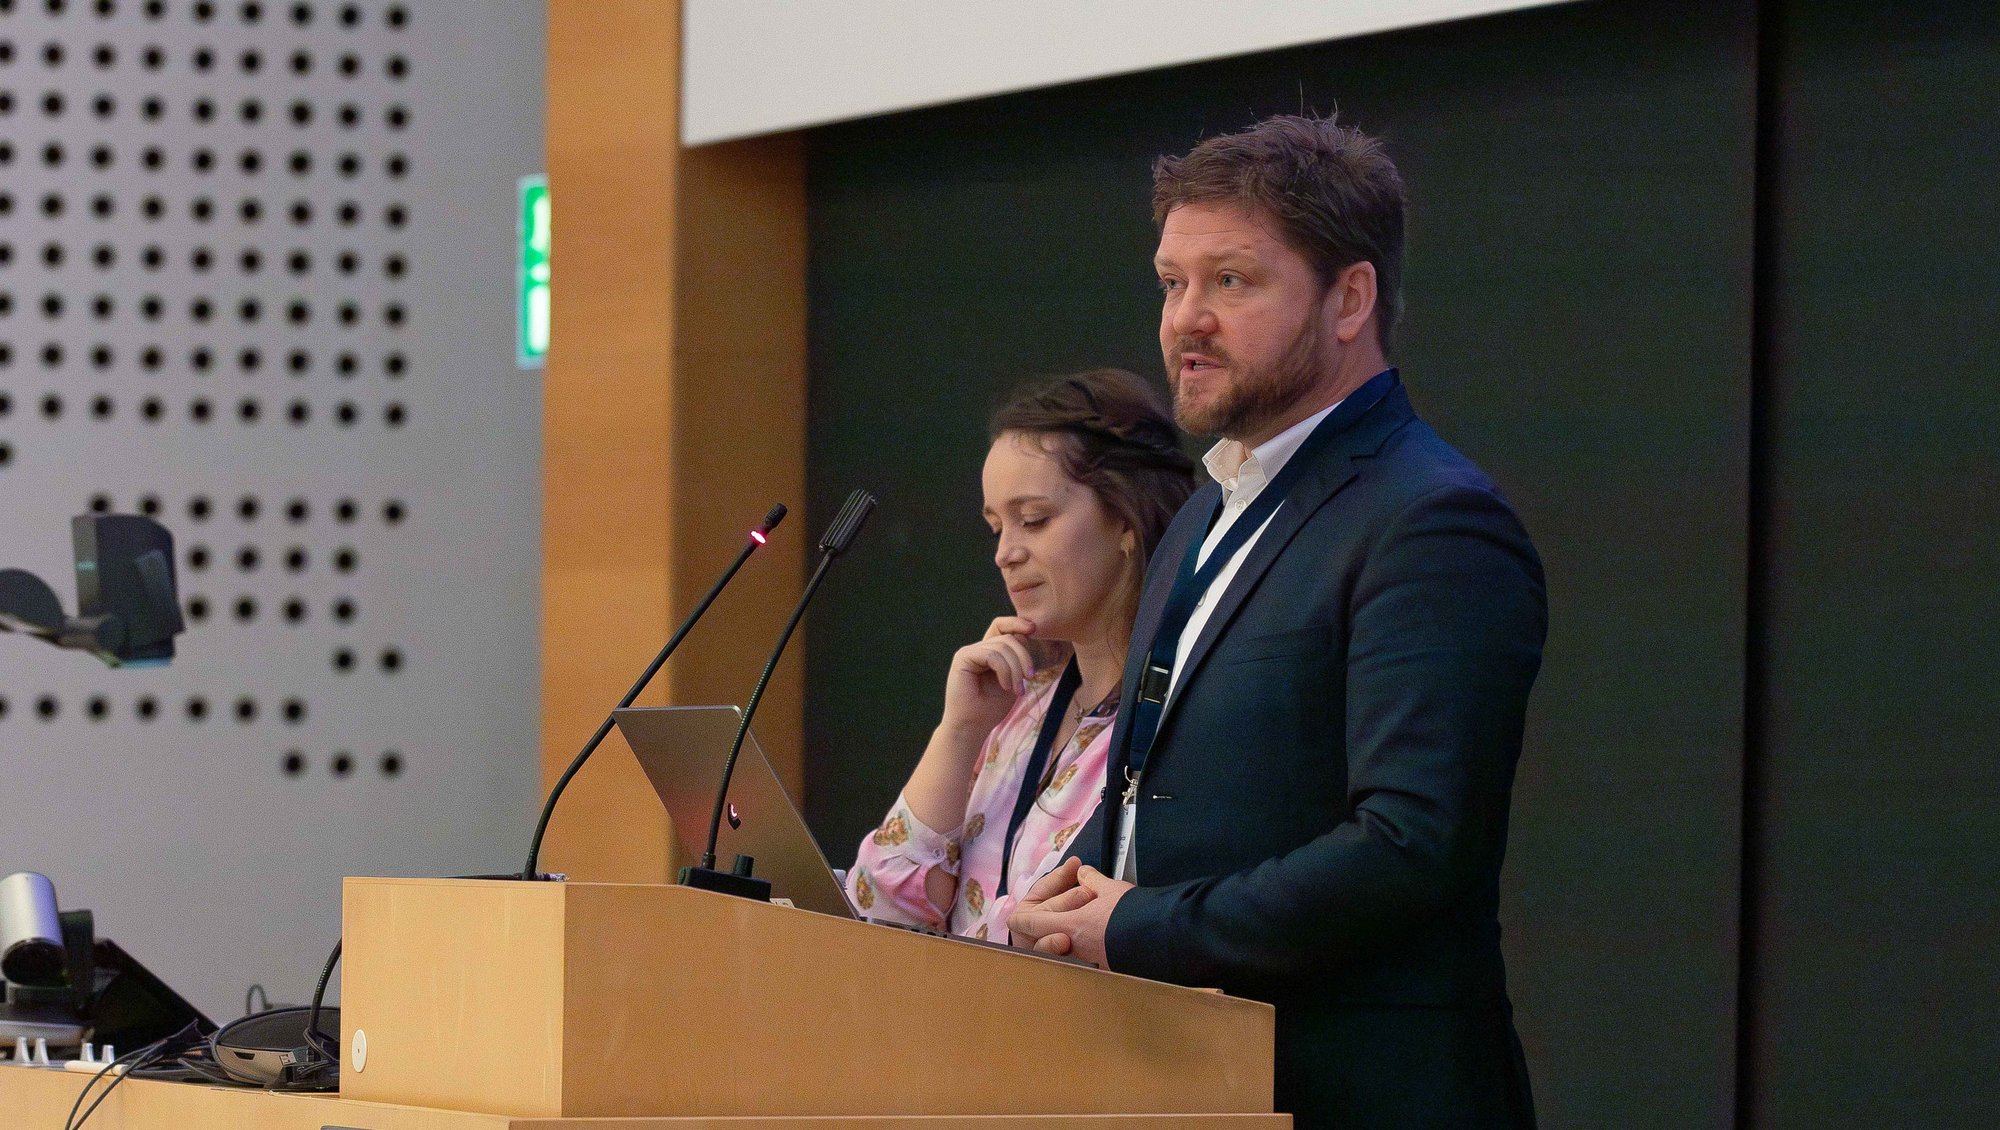 At 08:15, the new chairperson of the PhD Day organizing committee, Anders Etzerodt, extends a welcome along with Sofie Abildgaard Jacobsen, who is the chairperson of the PhD association at Health. Photo: Sebastian Skousgaard, AU Health.